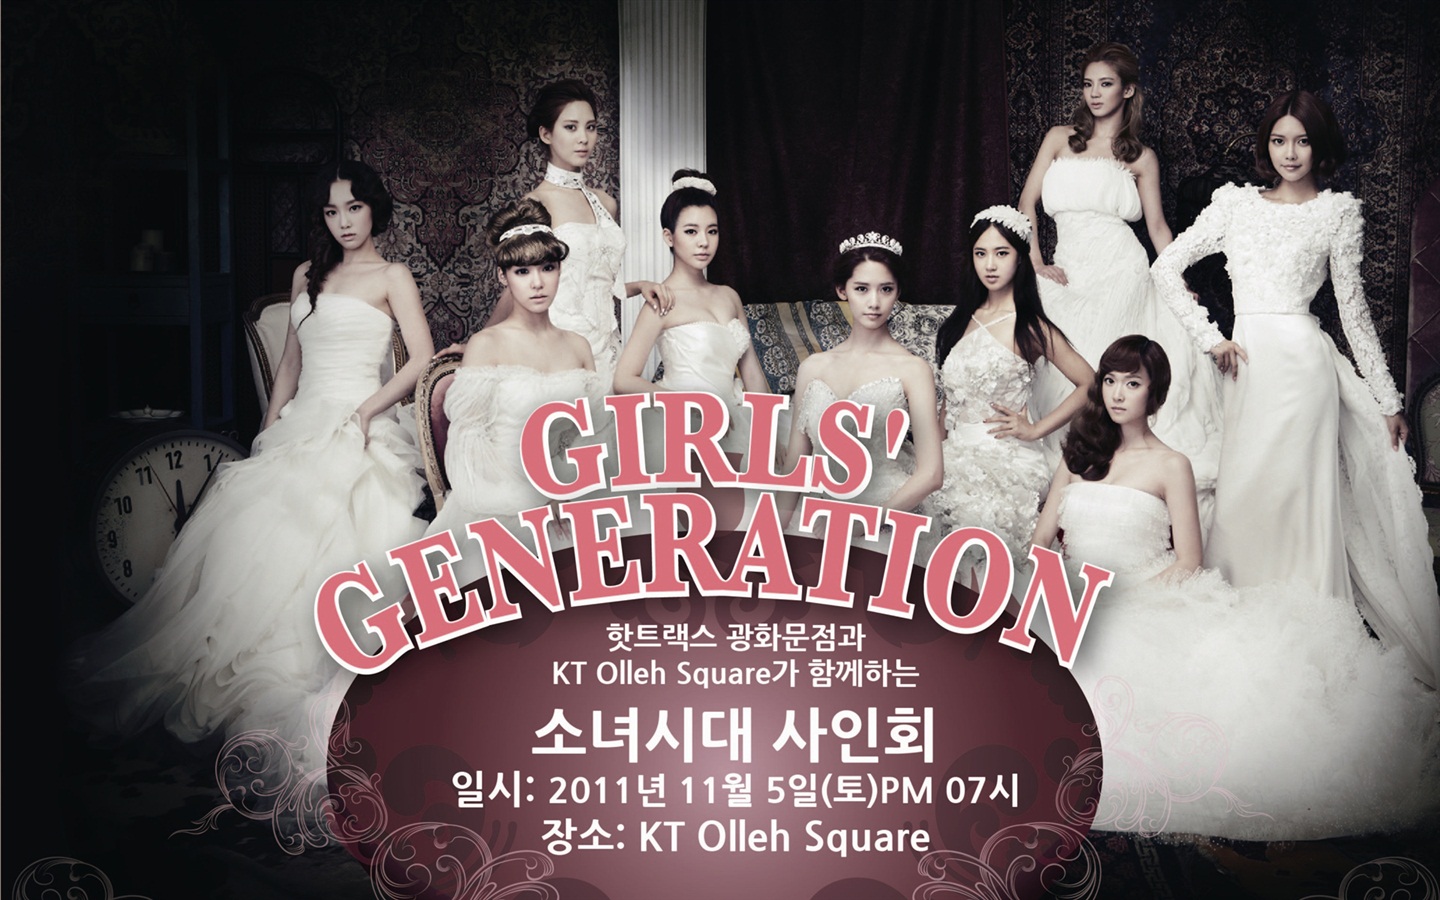 Girls Generation latest HD wallpapers collection #8 - 1440x900